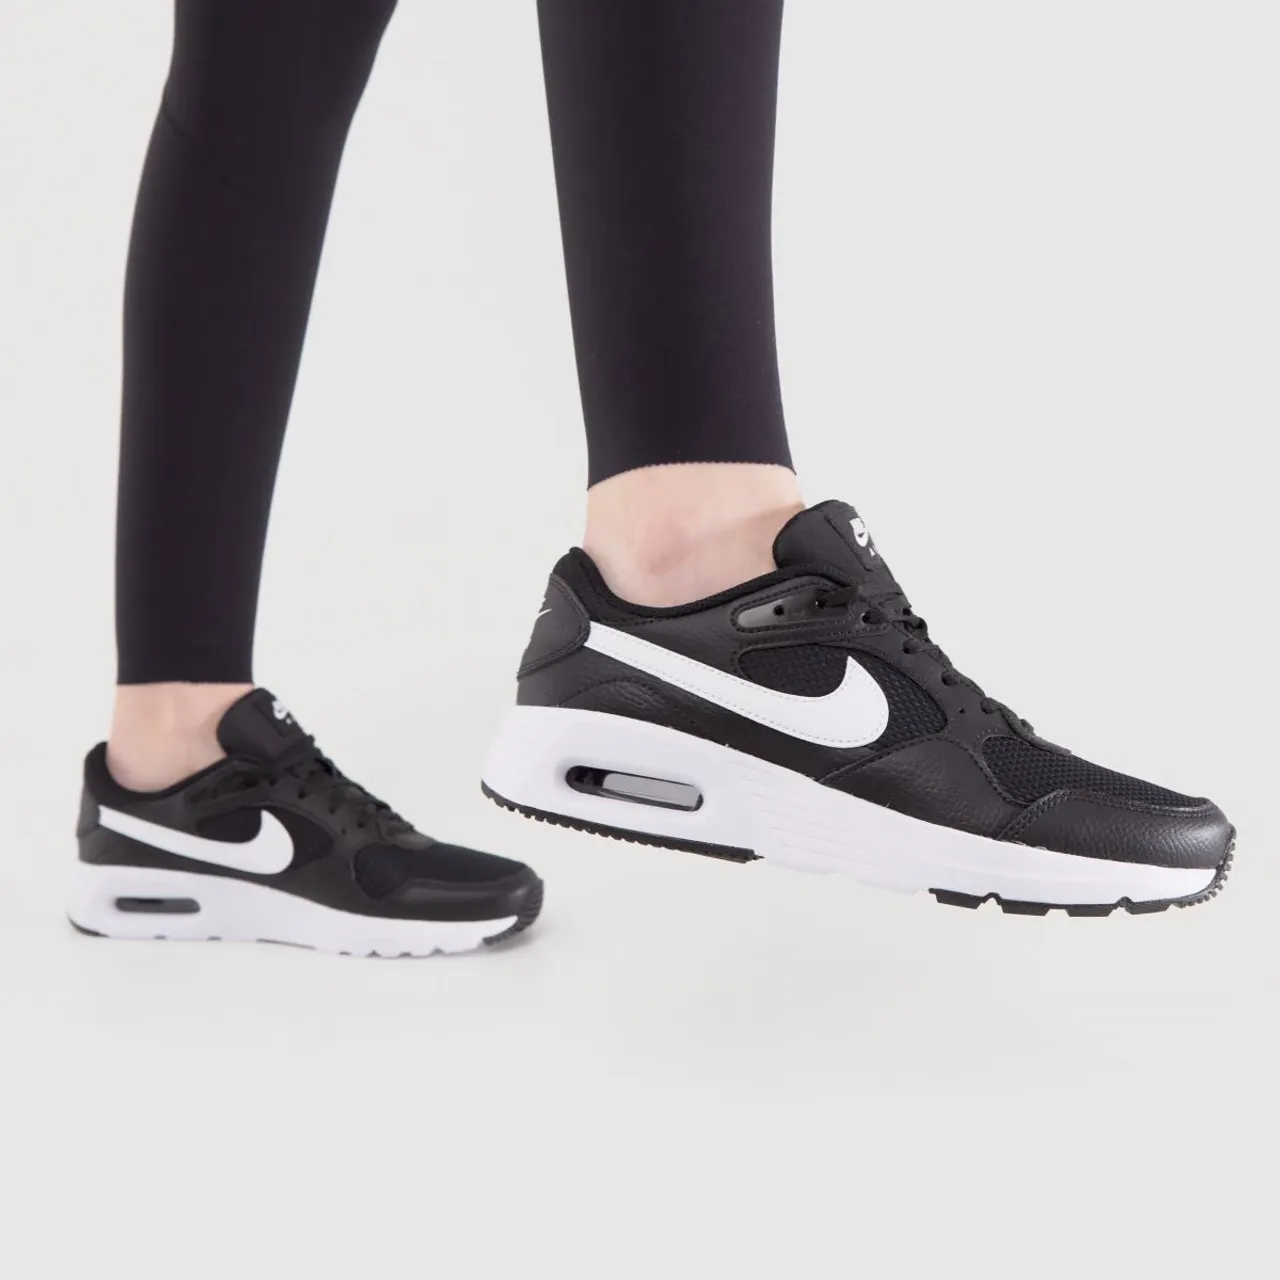 Nike Air Max Sc Trainers In Black & White